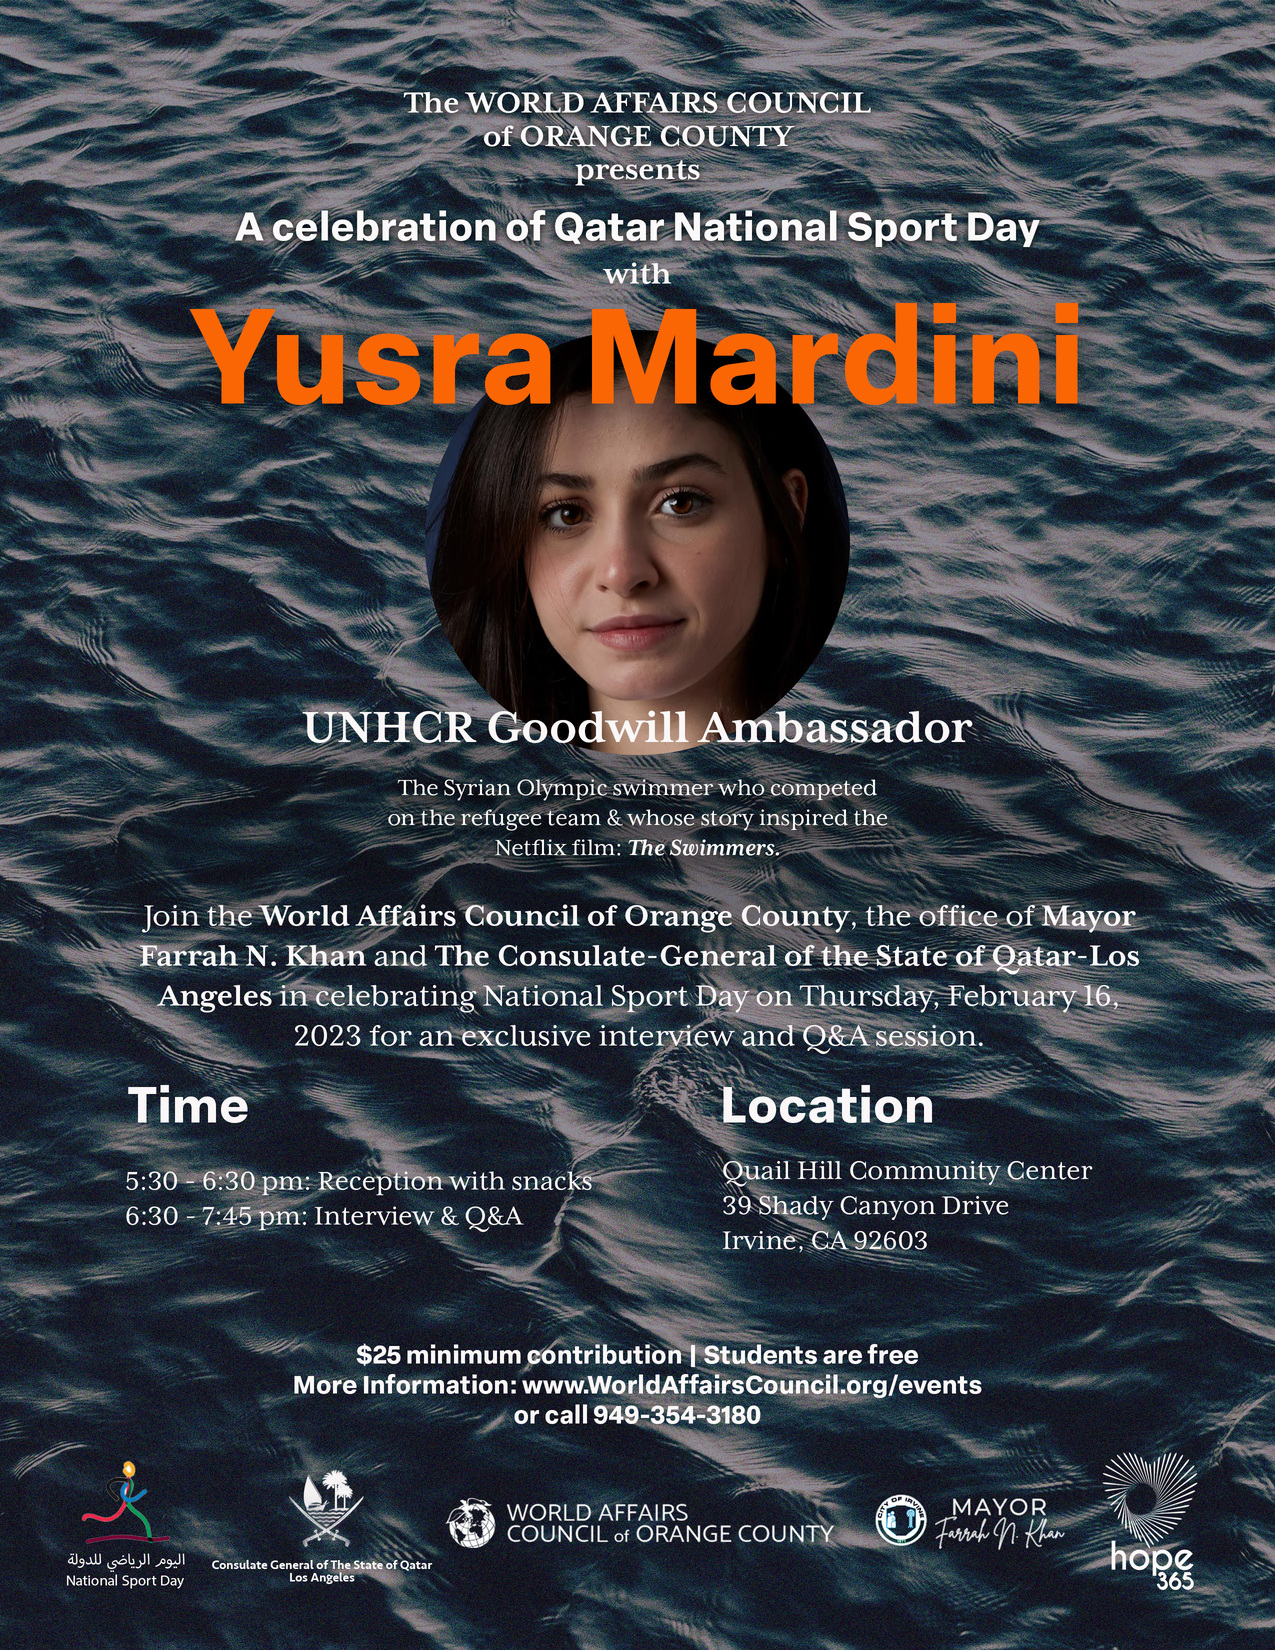 Exclusive Interview and Q&A with Yusra Mardini